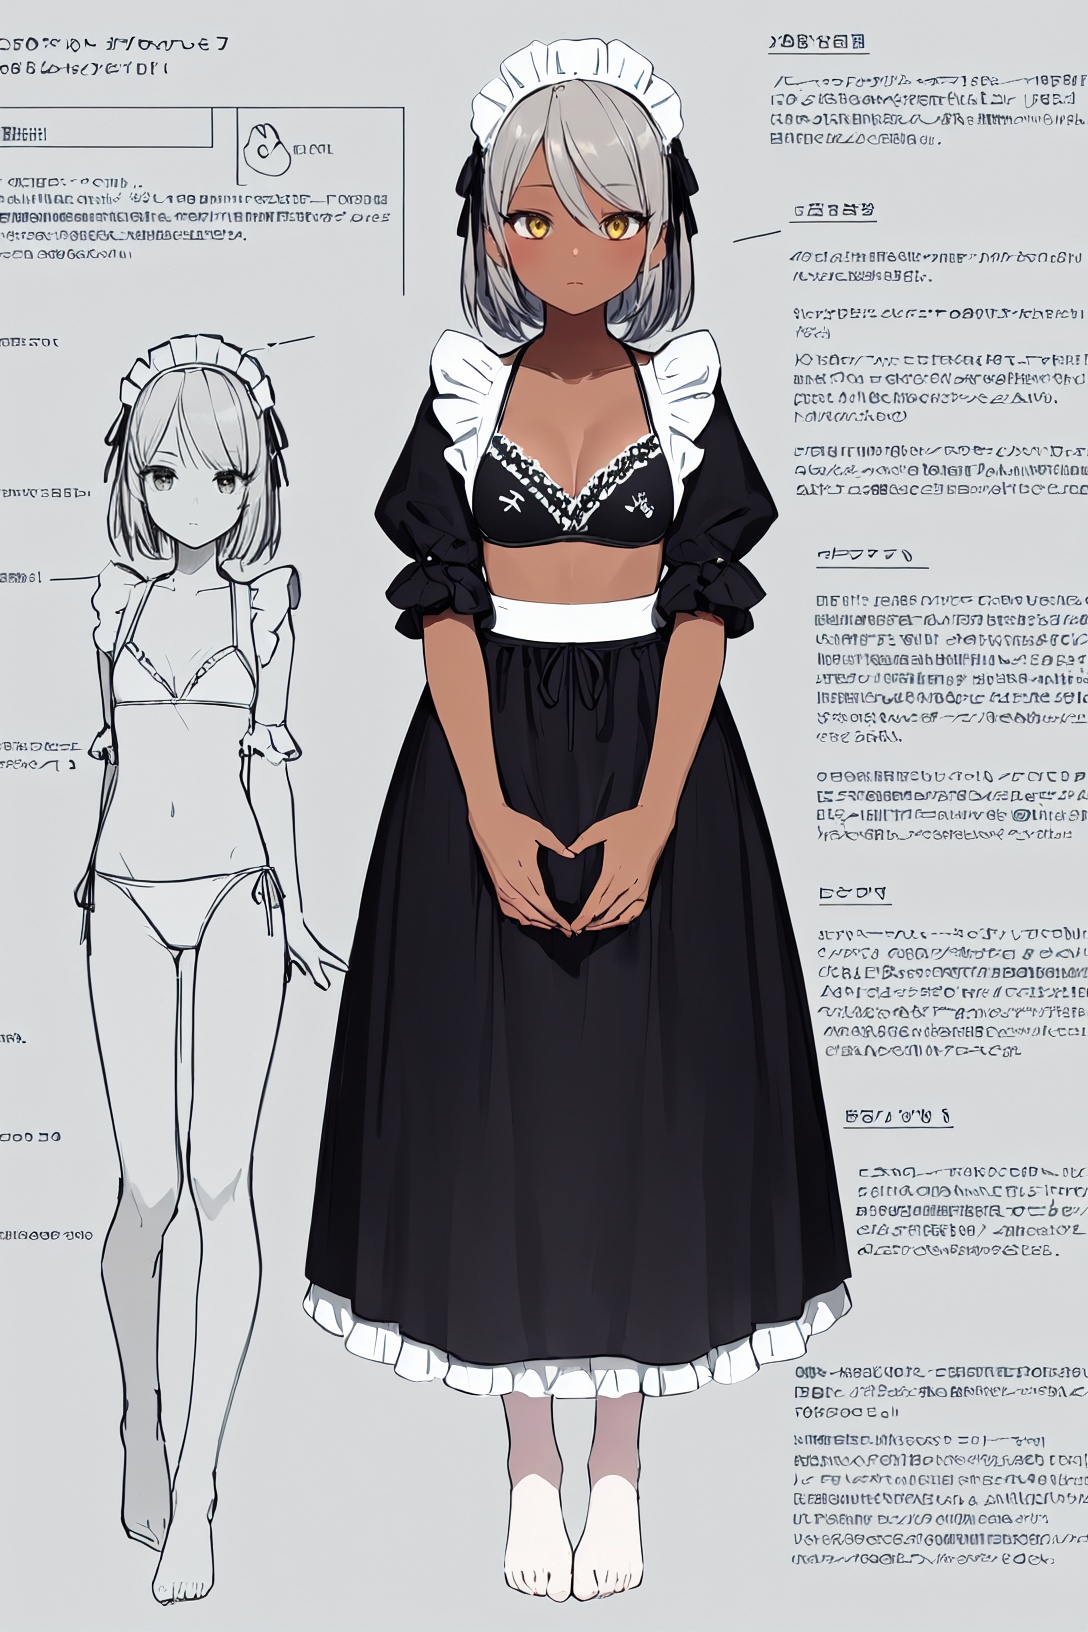 multiple views, pencil sketch, (sketch:1.25), (loli), ((no shoes)), shy, best quality, graphite \\(medium\\), ske, gradient, rainbow, note, Line draft, highres, absurdres, (ultra-detailed:1.1), (illustration:1.1), (infographic:1.2), pajamas, (all clothes configuration:1.15), (solo), perfectly drawn hands, standing, cohesive background, paper, action, (character design:1.1), <lora:Maid Bikini (Anime+Realistic) Goofy Ai 服装:1>,(Maid Bikini,maid headdress:1.2), (frills:1.2), alternate costume,<lora:Carol-v100-000019:0.8:lbw=OUTALL>, Carol, 1girl, dark-skinned female, dark skin, yellow eyes, grey hair, <lora:Anime Lineart ,Manga-like (线稿,線画,マンガ風,漫画风) Style:0.4>, <lora:sketchy:0.2>, [[delicate fingers and hands:0.55]::0.85], (detail fingers), (empty hands:1.1), bare_hands, (beautiful_face), ((intricate_detail)), (revealing clothes:1.2), clear face, ((finely_detailed)), fine_fabric_emphasis, ((glossy)), 